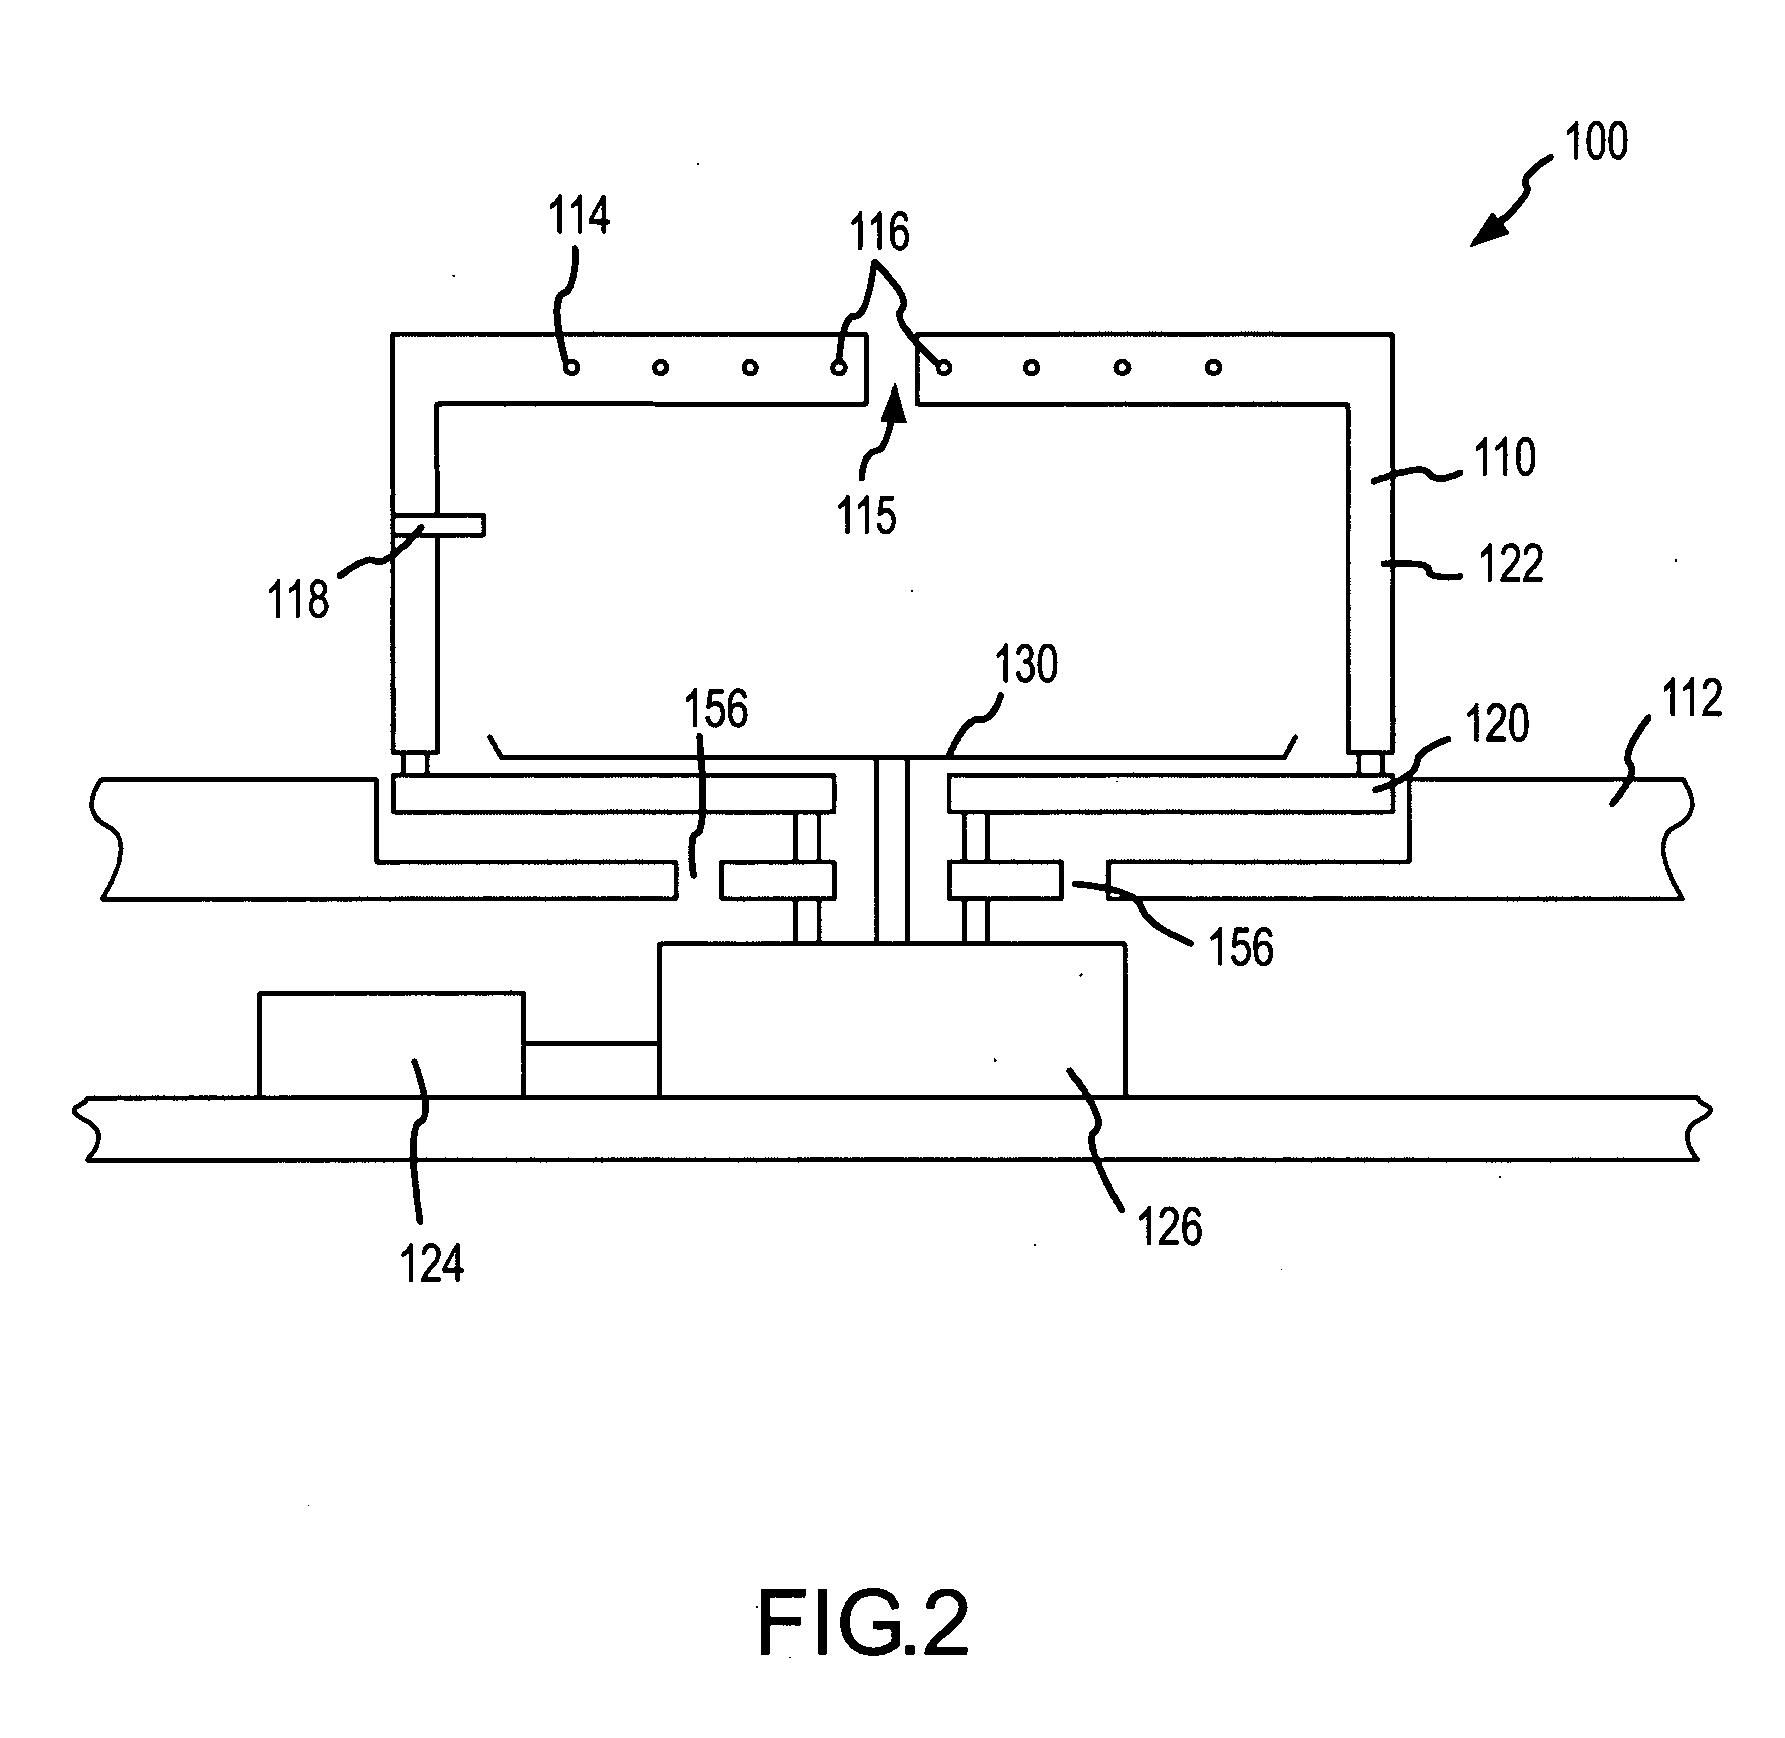 Methods and apparatus for analyzing materials